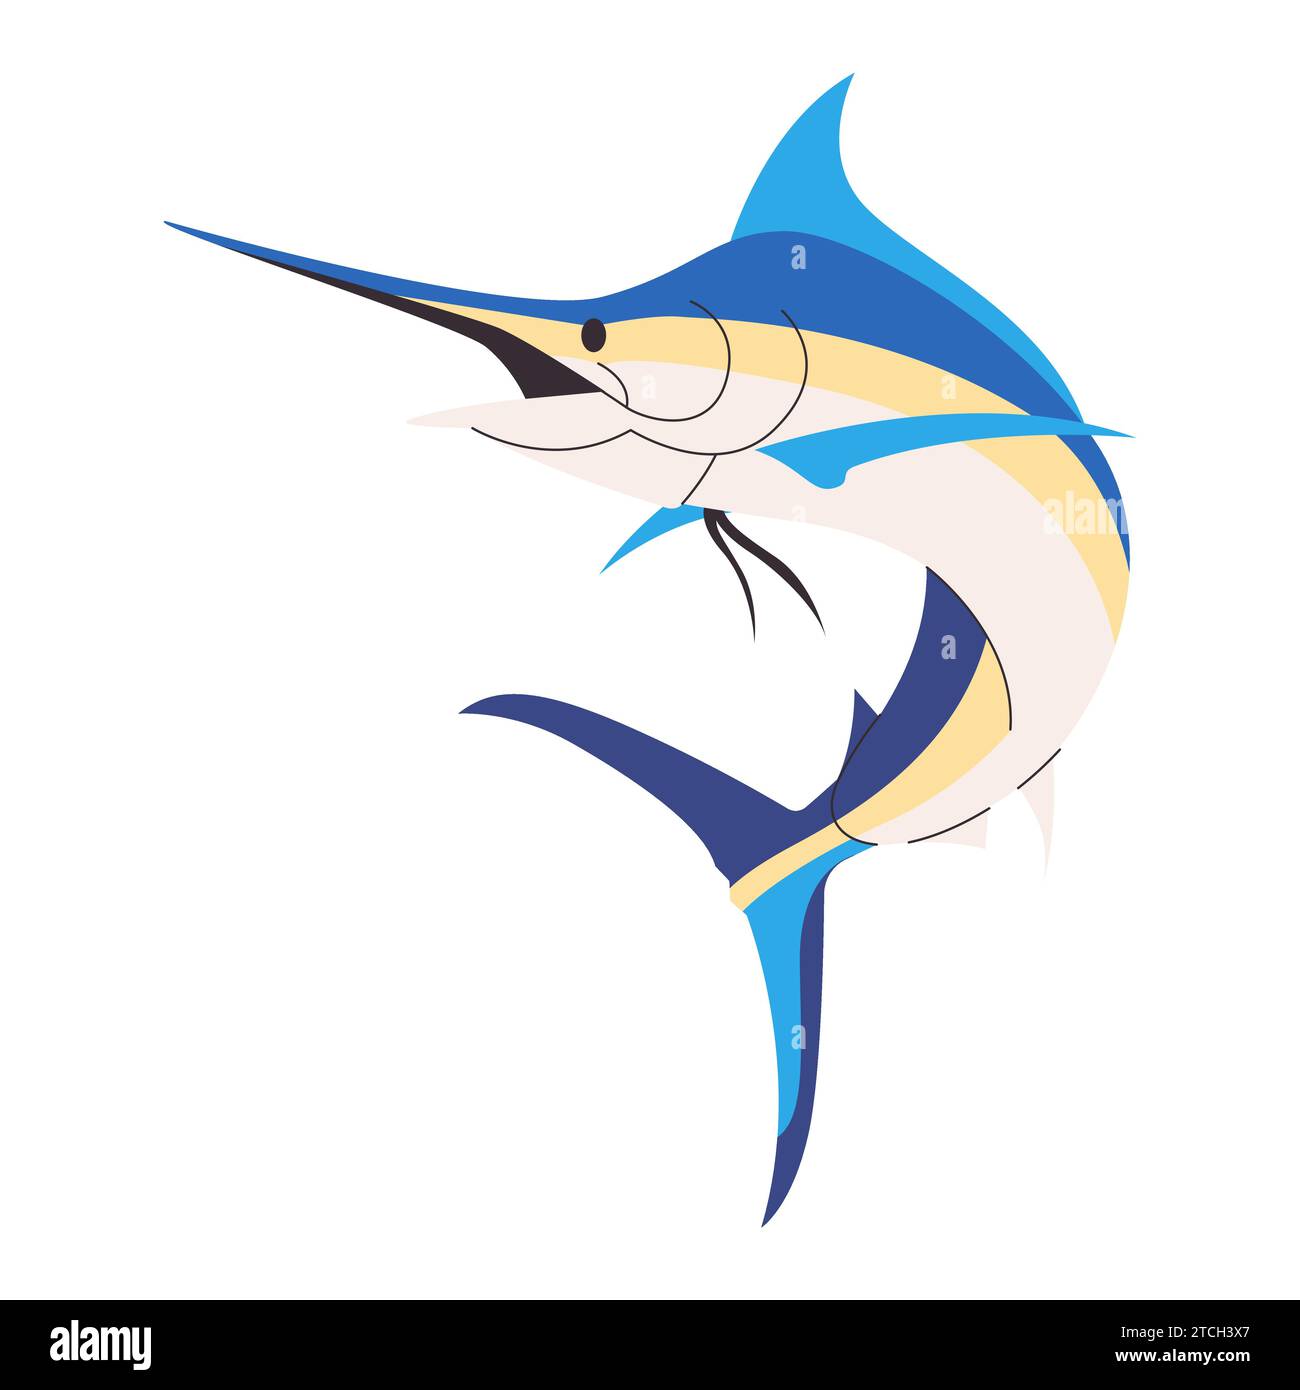 swordfish or blue marlin fish wild nature ocean big and sharp animal with jumping pose sea creature Stock Vector